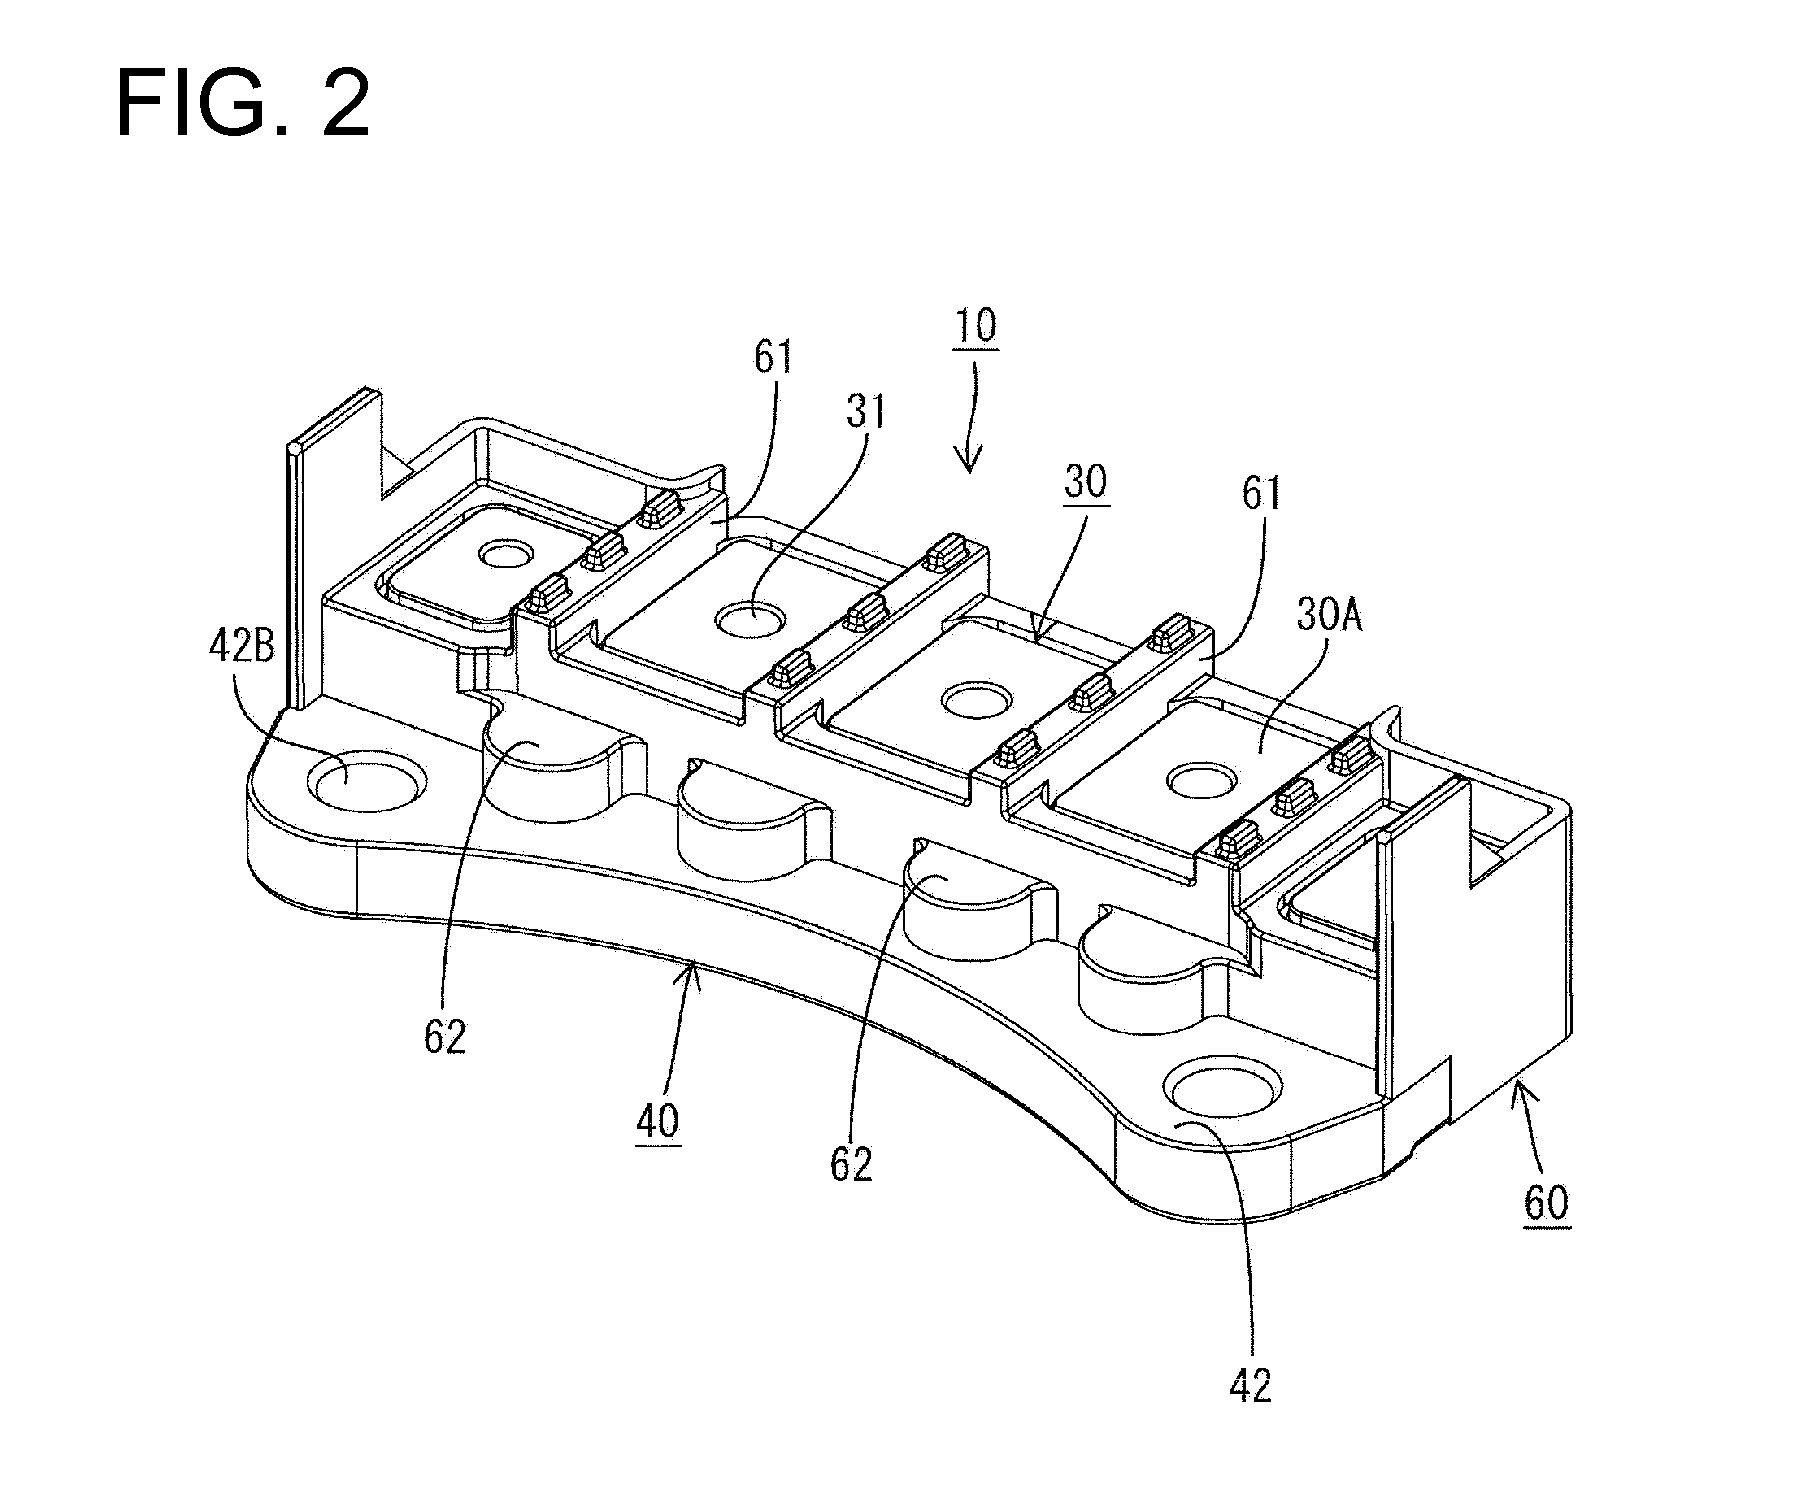 Terminal block and motor provided therewith